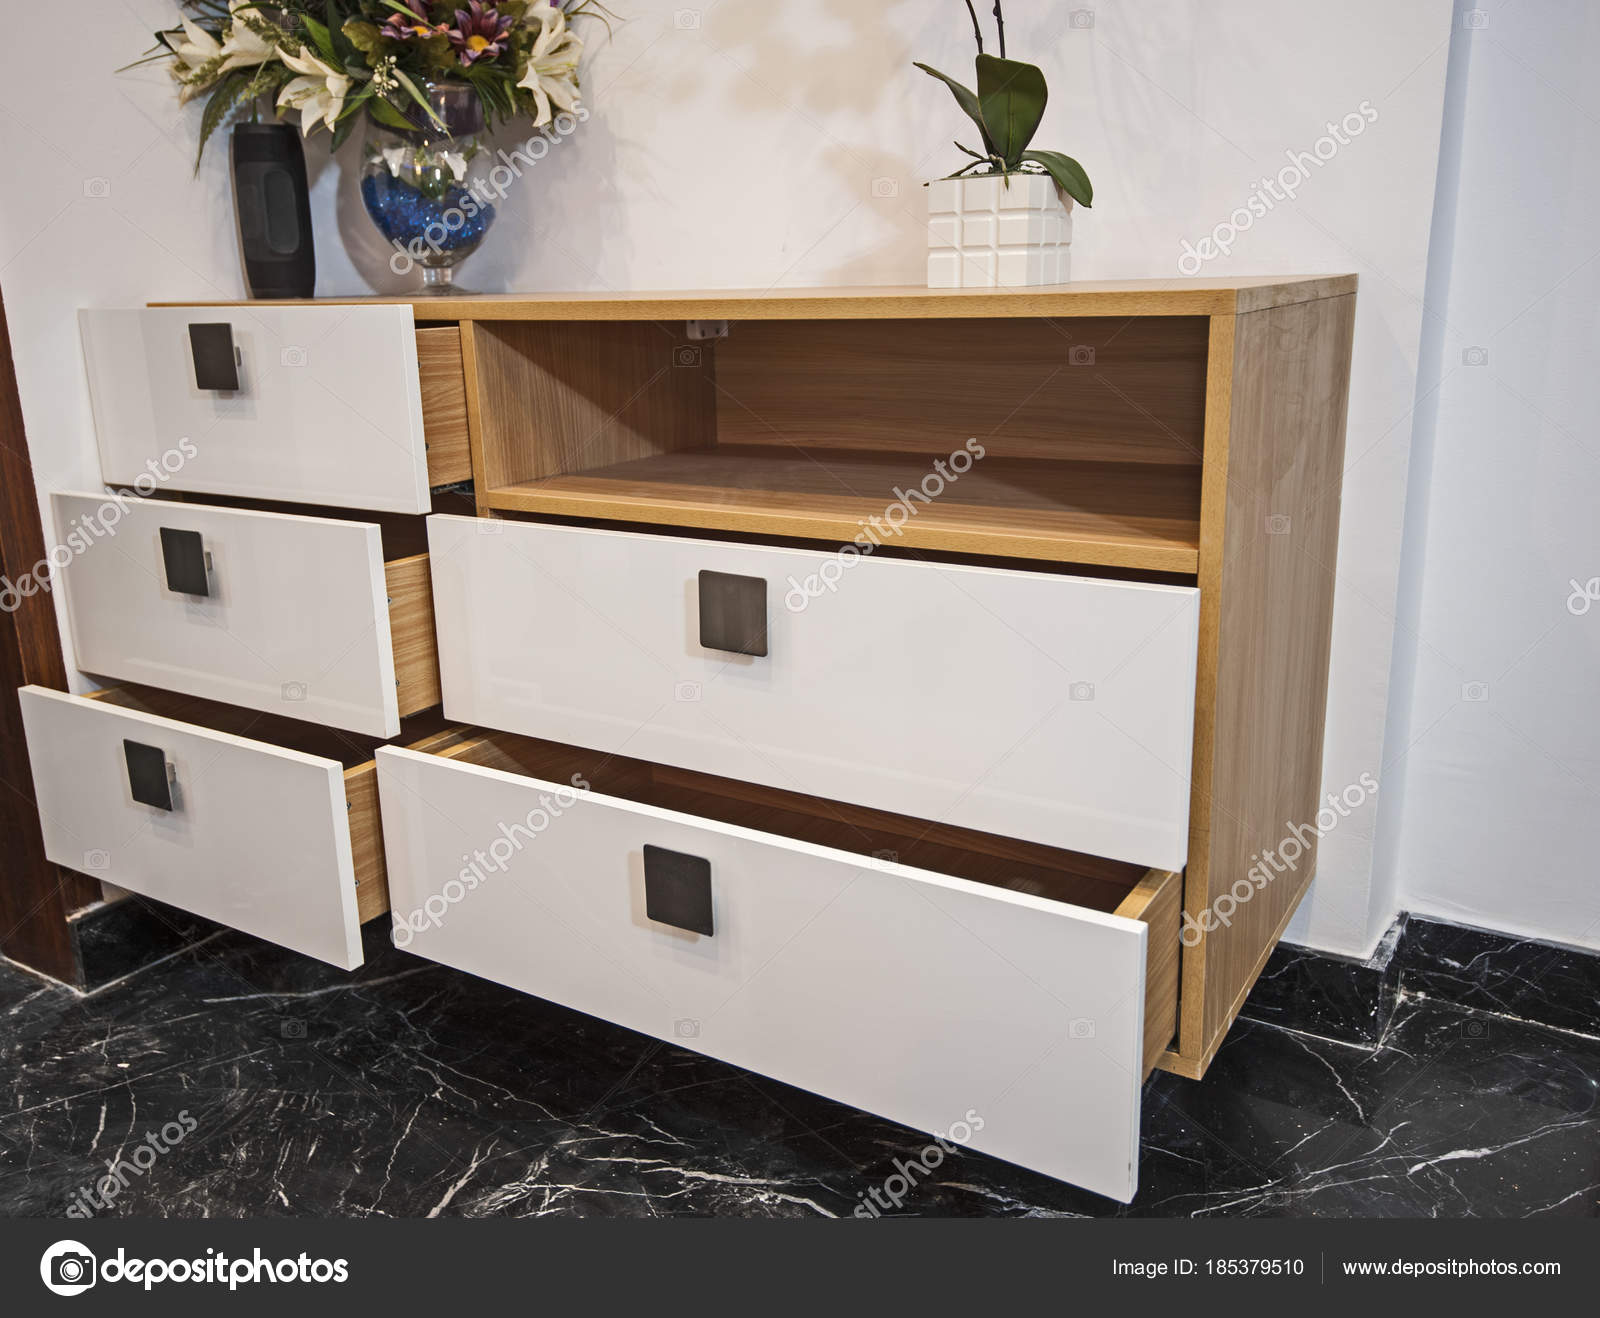 Dresser Table With Drawers Dressing Table Chest Of Drawers In